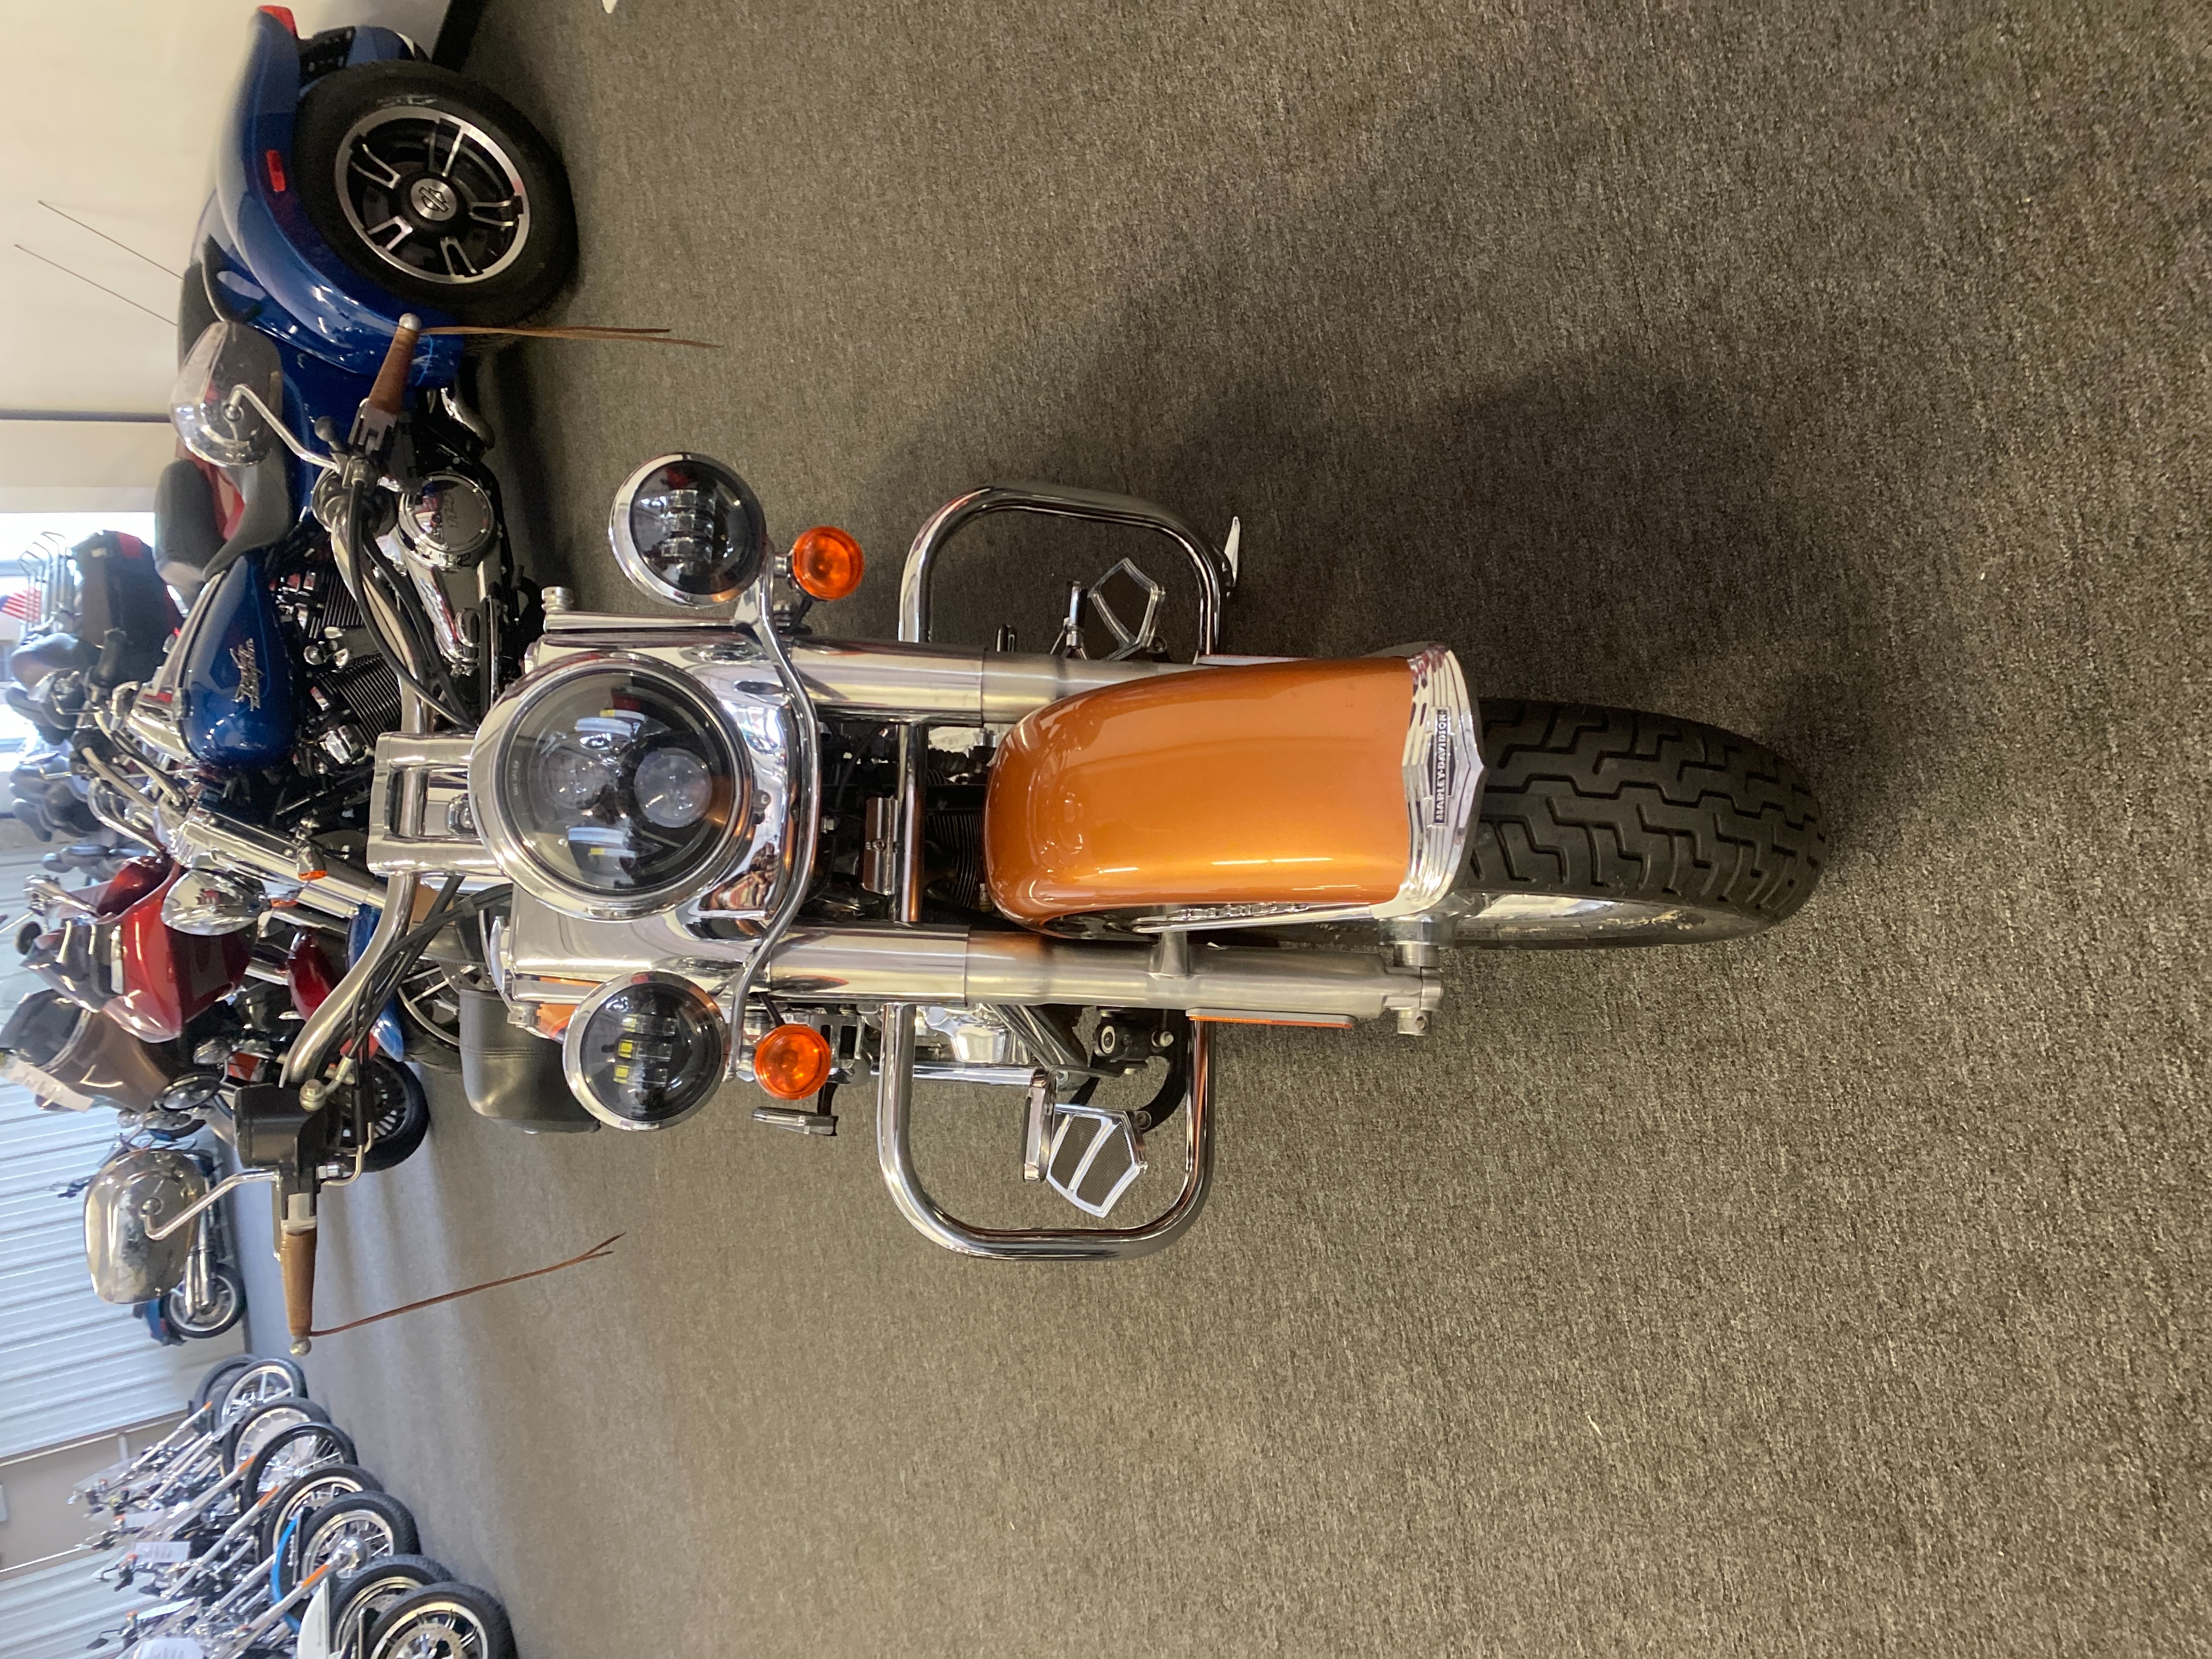 2008 Harley-Davidson Softail Deluxe at Outpost Harley-Davidson